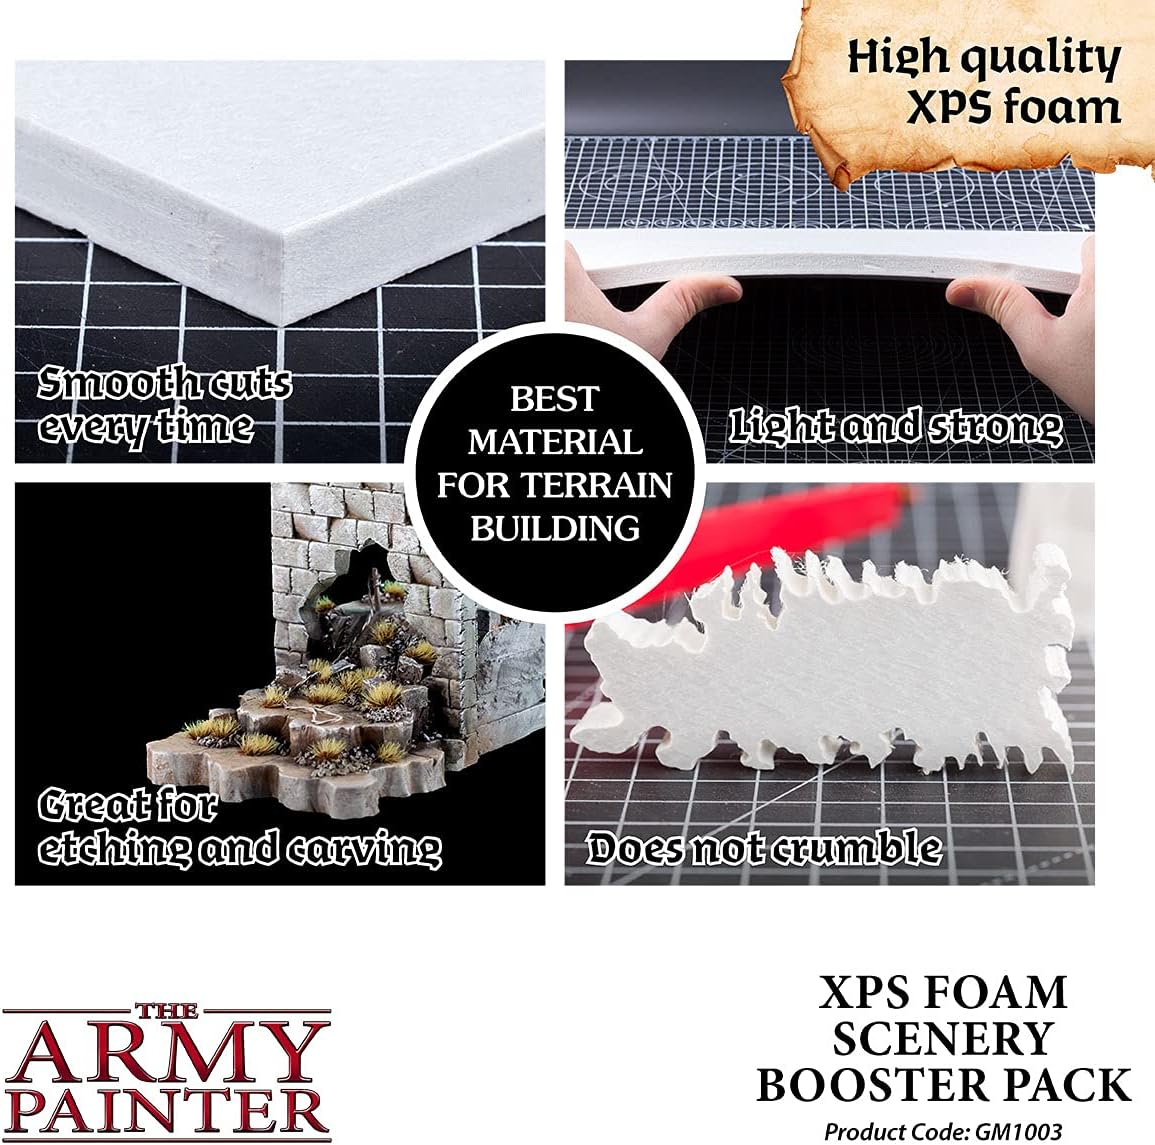 The Army Painter Gamemaster: XPS Foam Board Styrofoam Board - 7 Pack 2.95 x 15.75 x 12.01 inches Terrain Building Materials for DND, Wargames or Dioramas